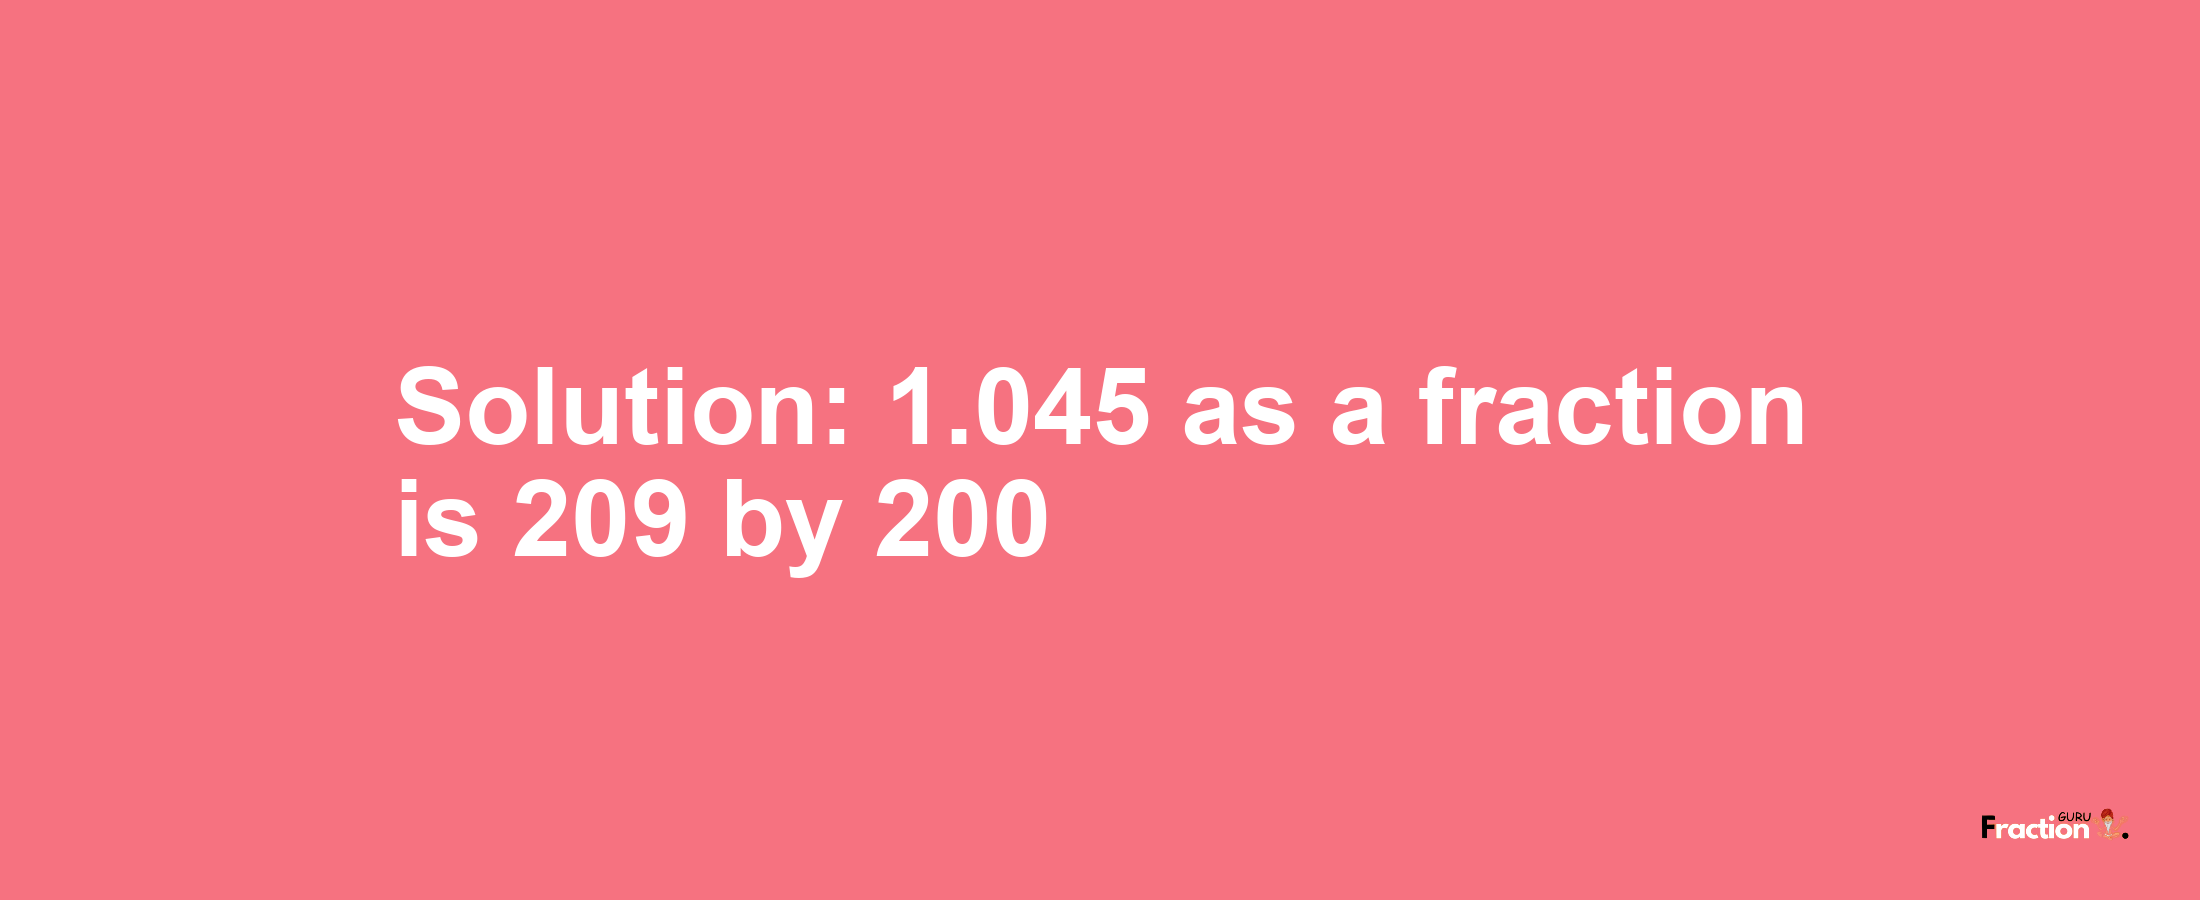 Solution:1.045 as a fraction is 209/200